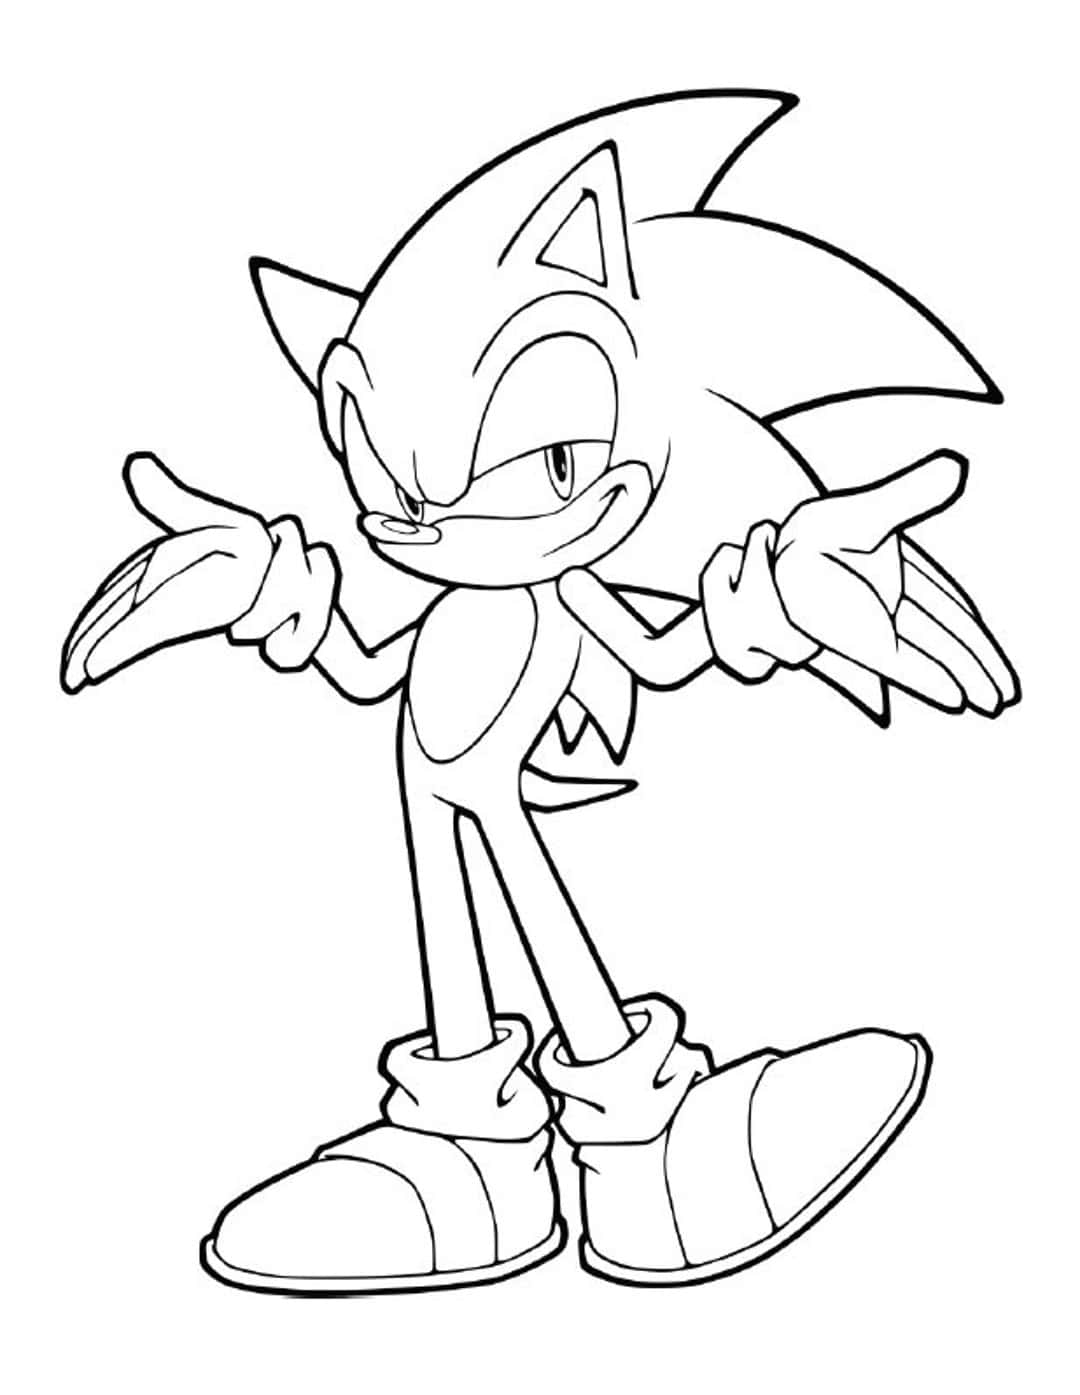 Download sonic the hedgehog coloring pages